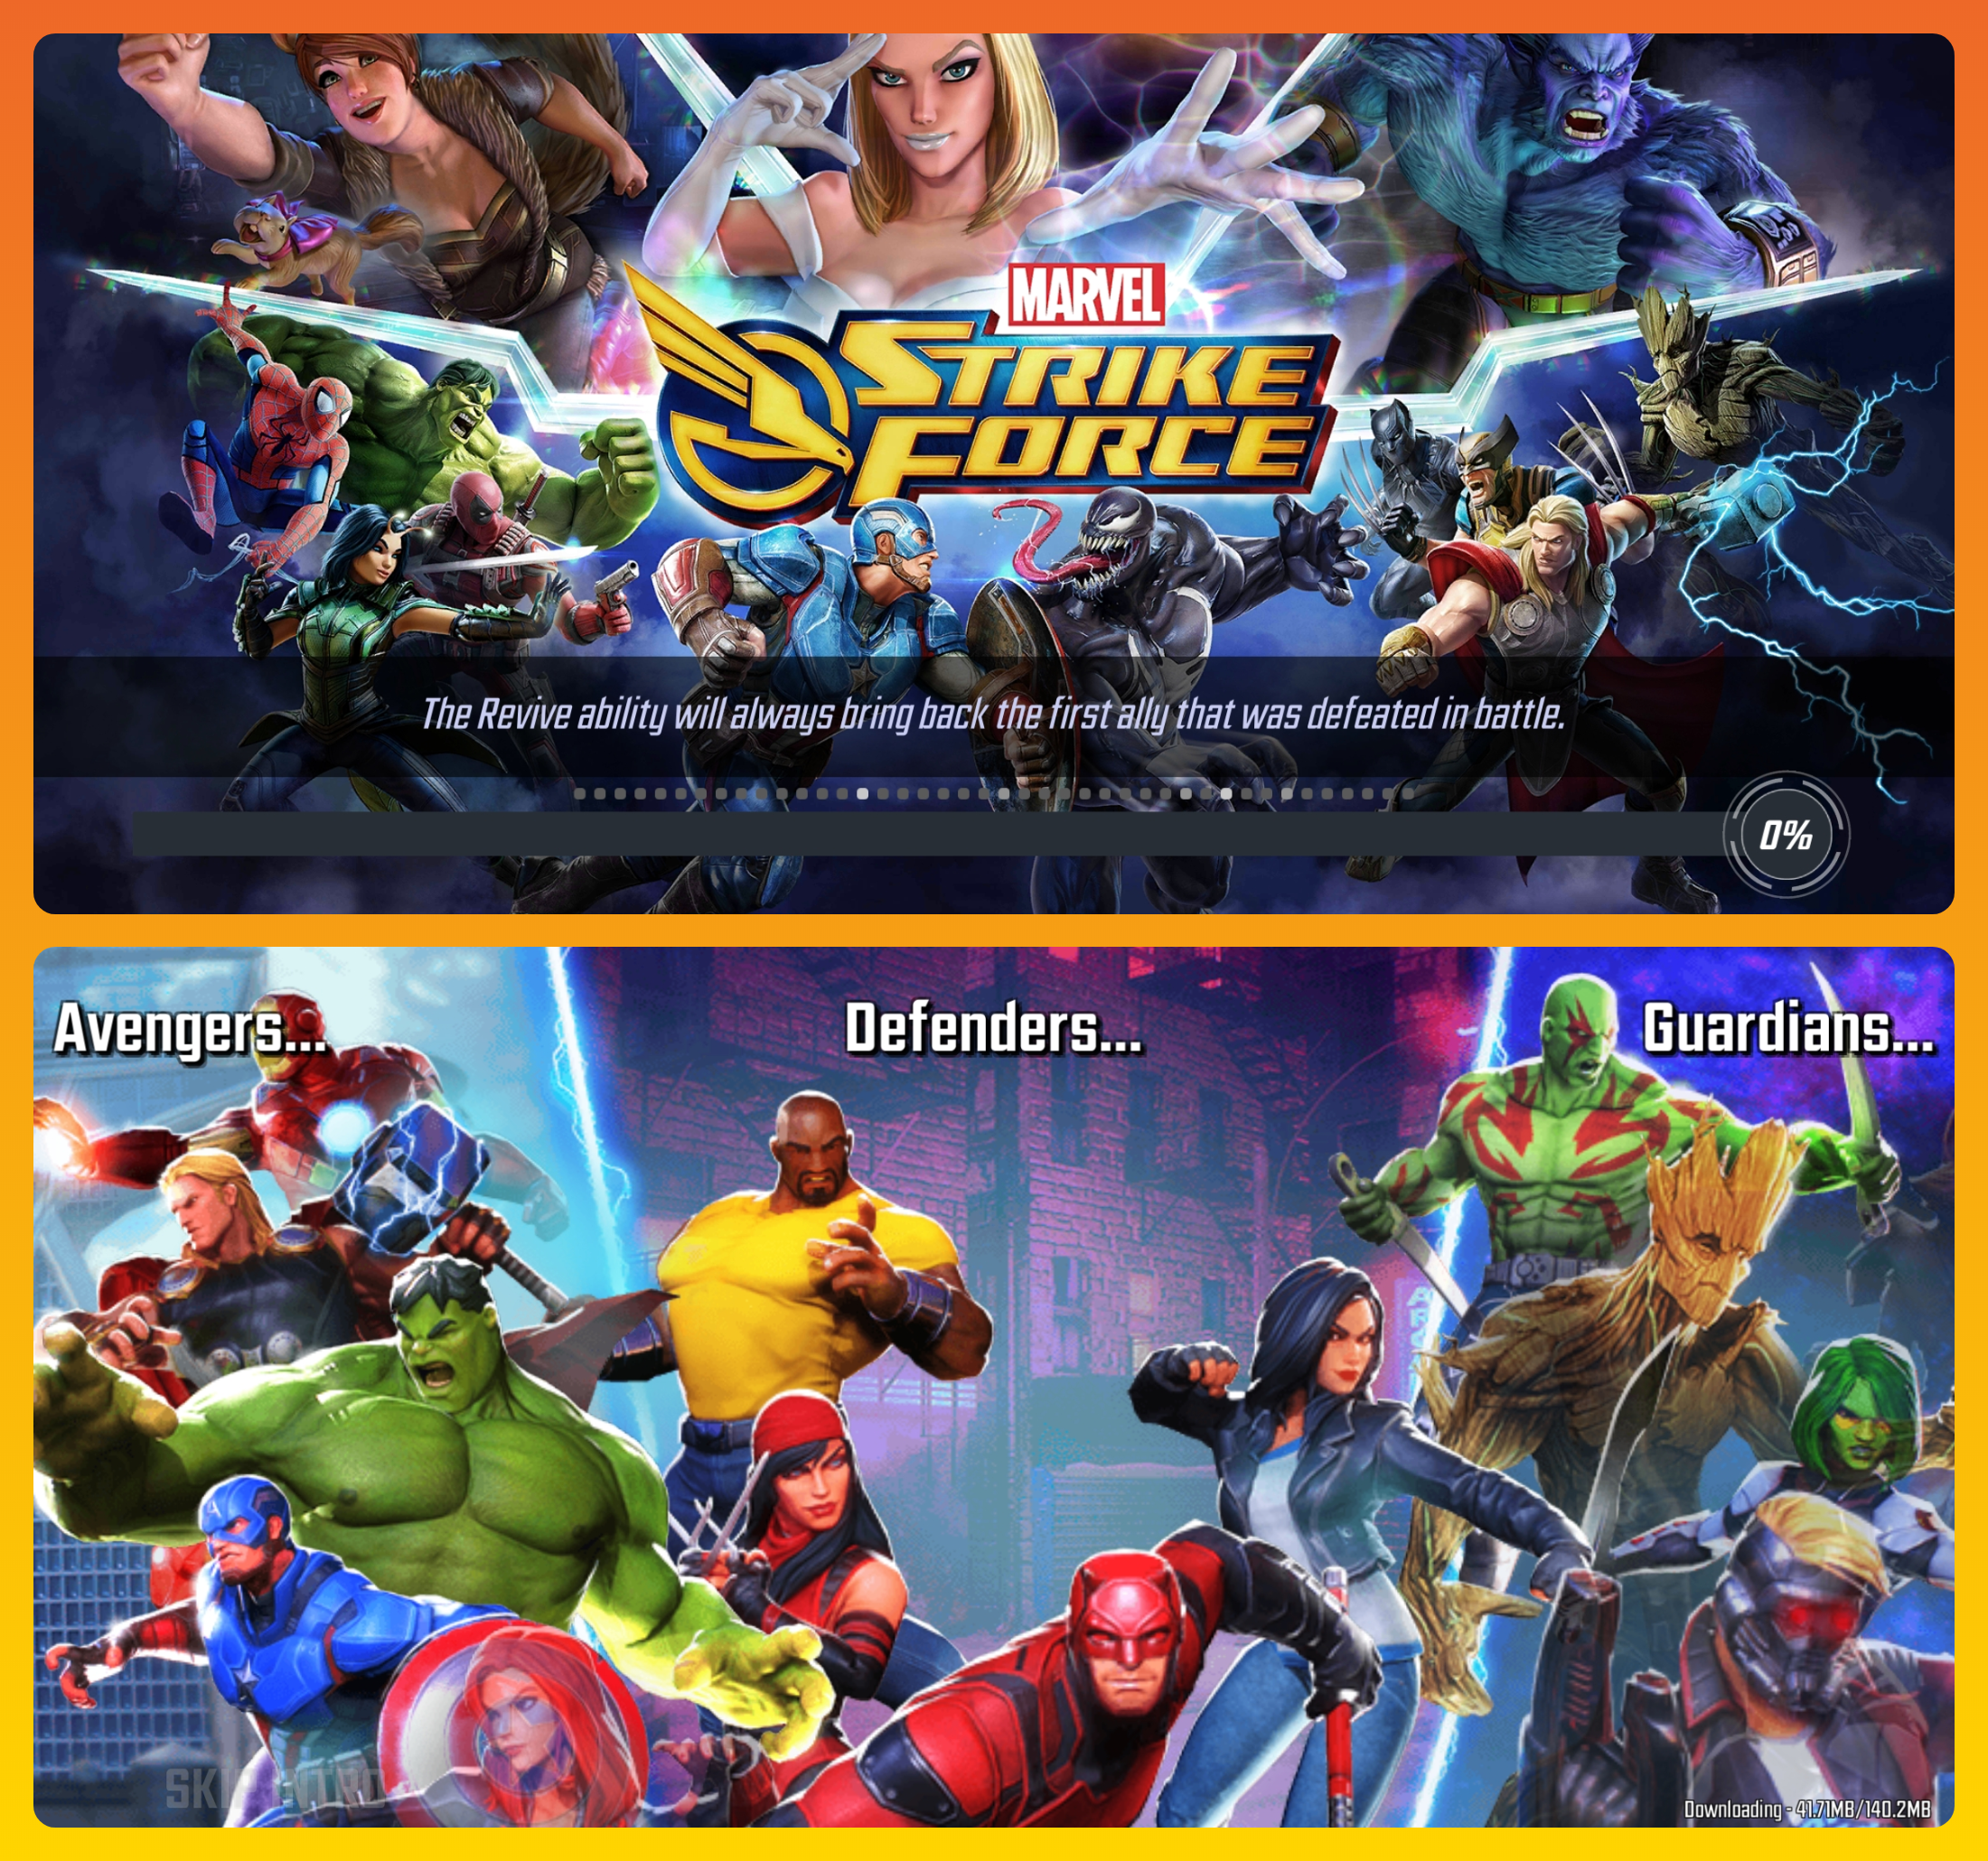 How to play on your PC/Laptop! - Marvel Strike Force 